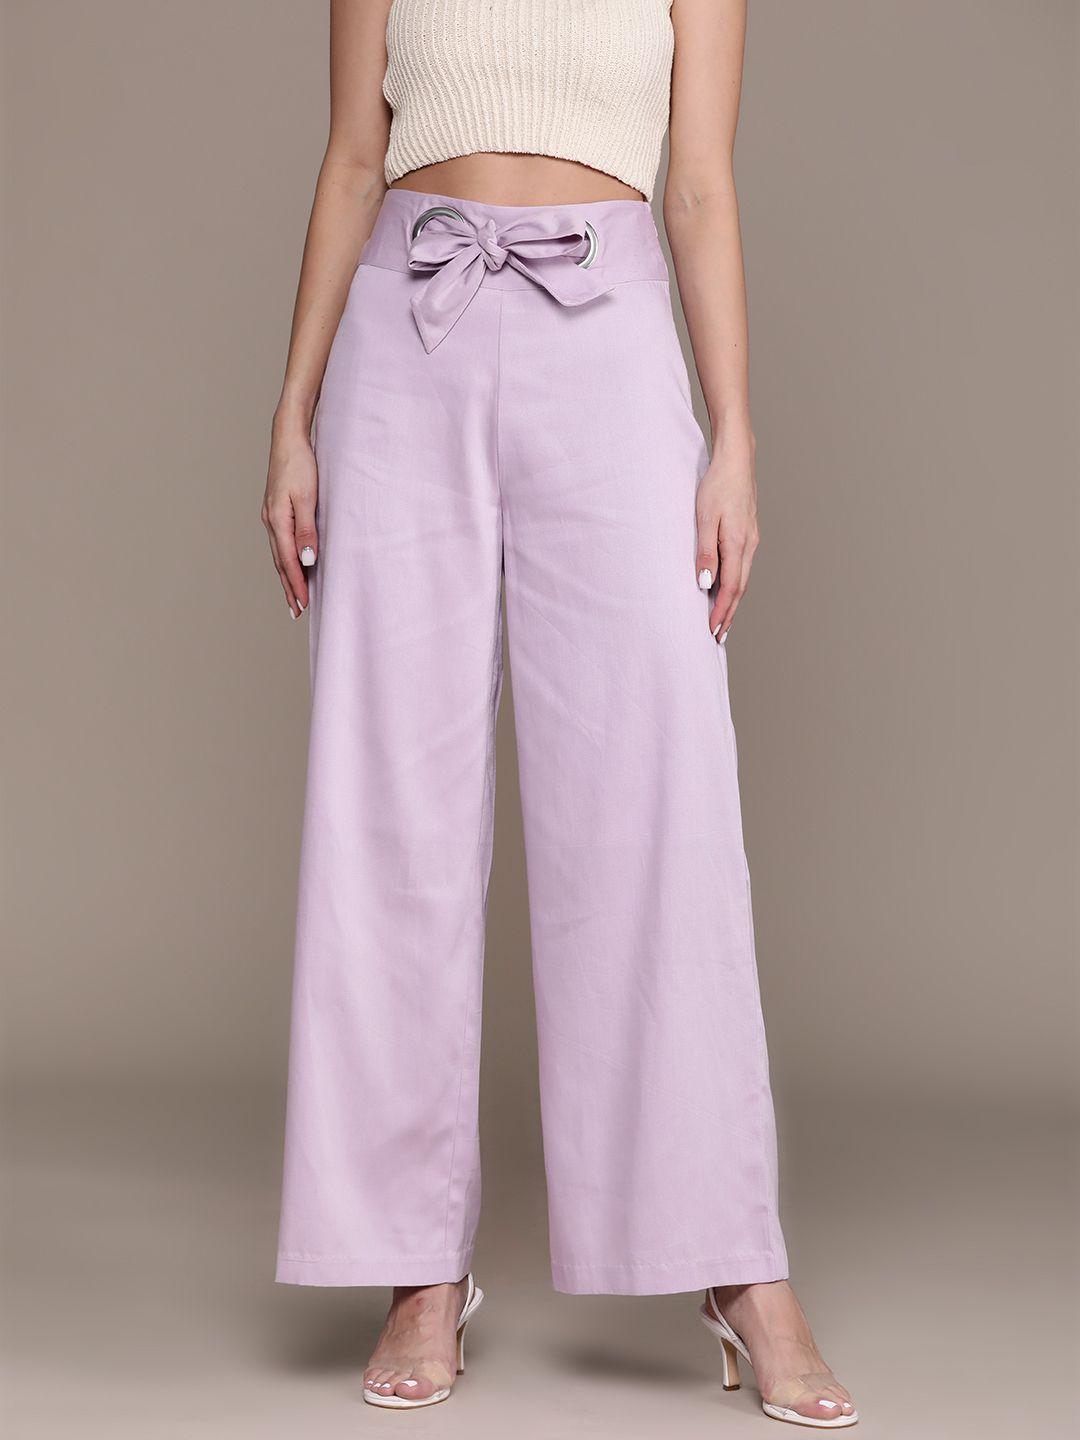 bebe-women-lavender-all-day-flared-high-rise-trousers